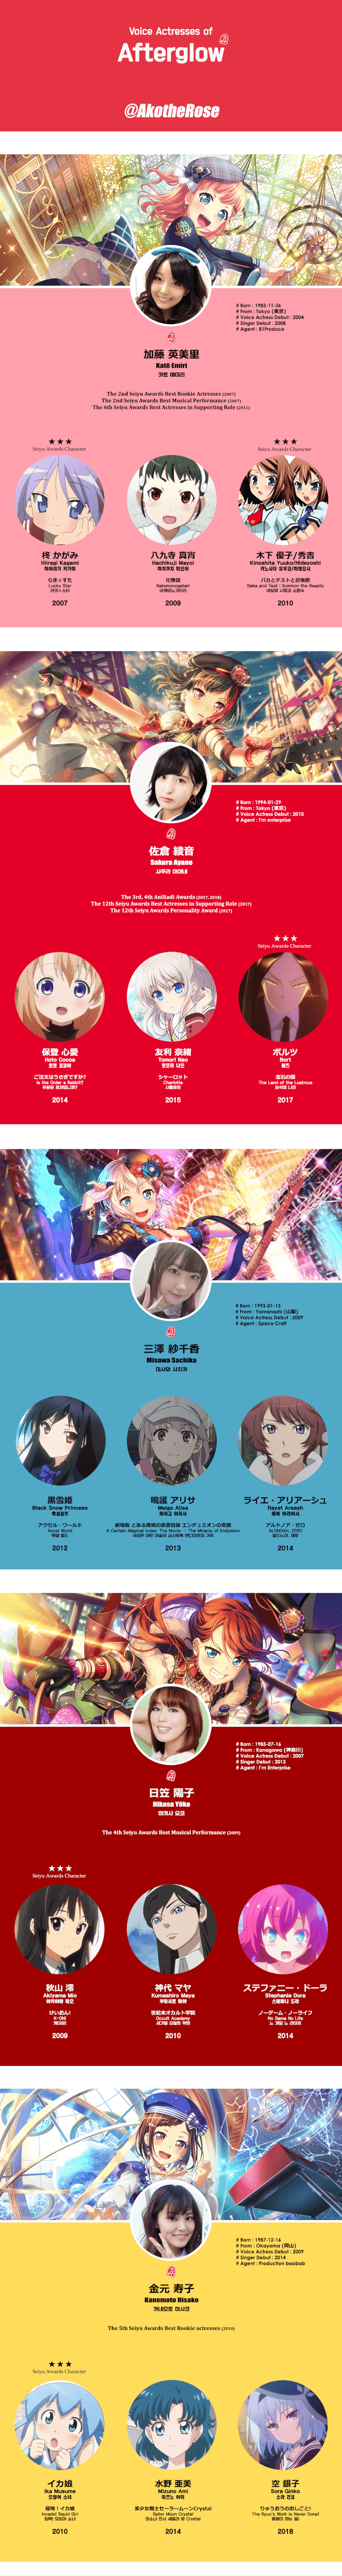     BanG_Dream's Voice Actresses Series

1. Poppin' Party

2. Afterglow ☜

3. Pastel Palettes...